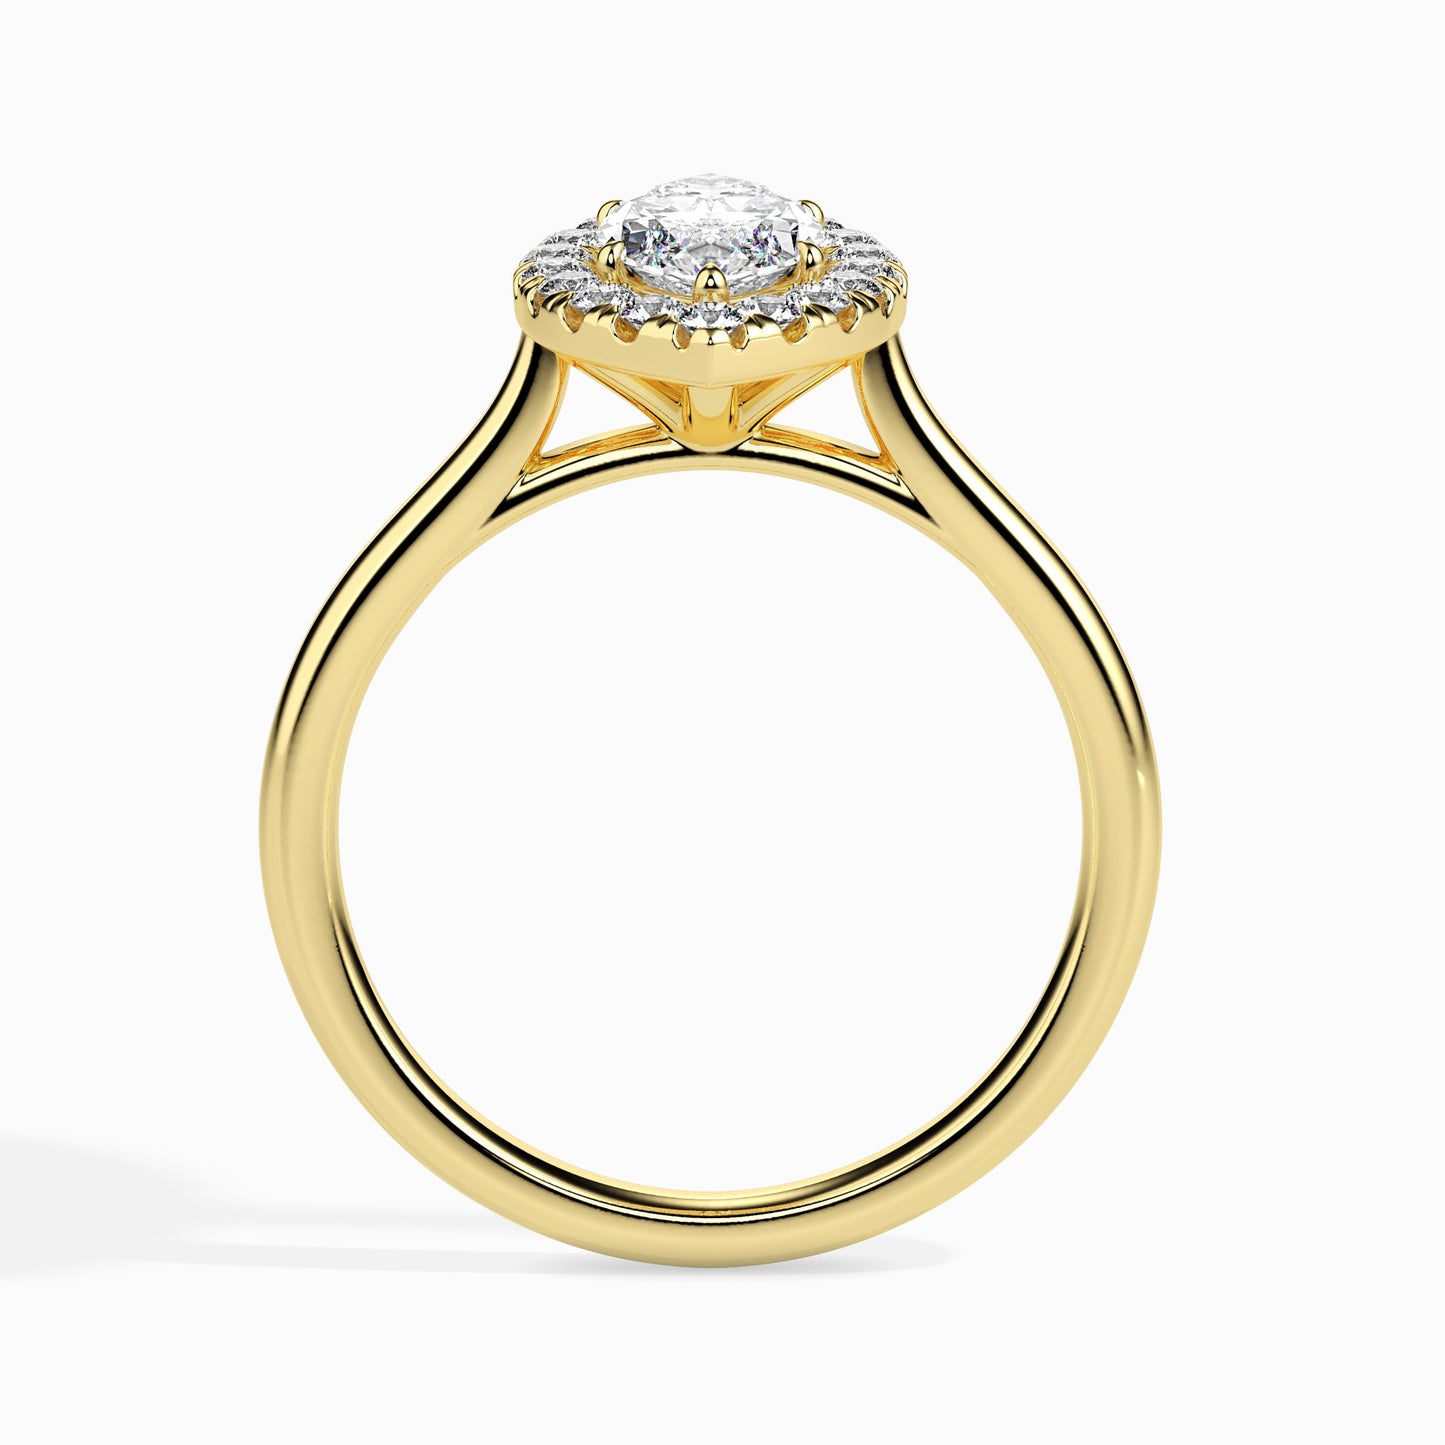 Solitaire Engagement Diamond Ring in 18 karat Yellow Gold by Fiona Diamonds